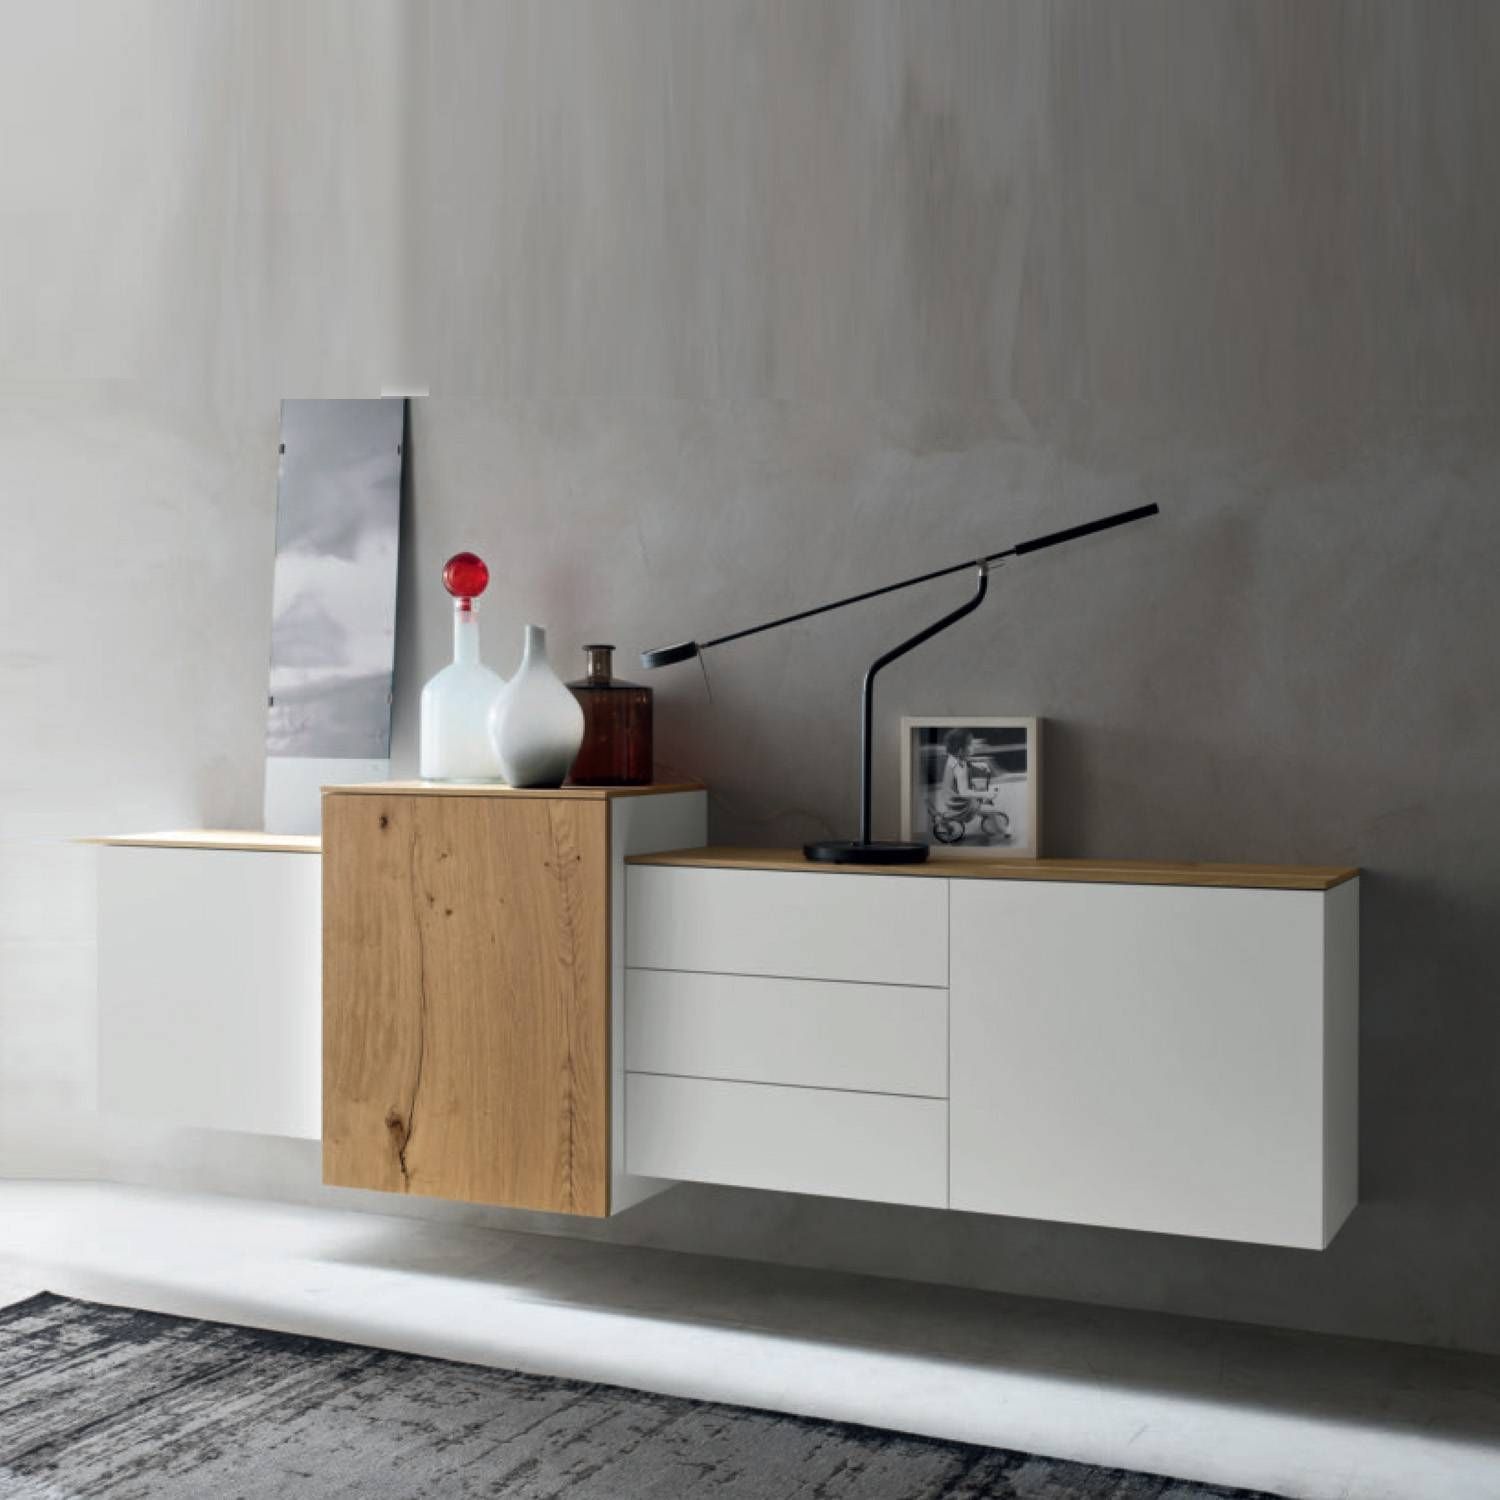 The Latest Furniture Fashion Trendsorme My Italian Living Ltd Within Contemporary Sideboards (View 16 of 30)